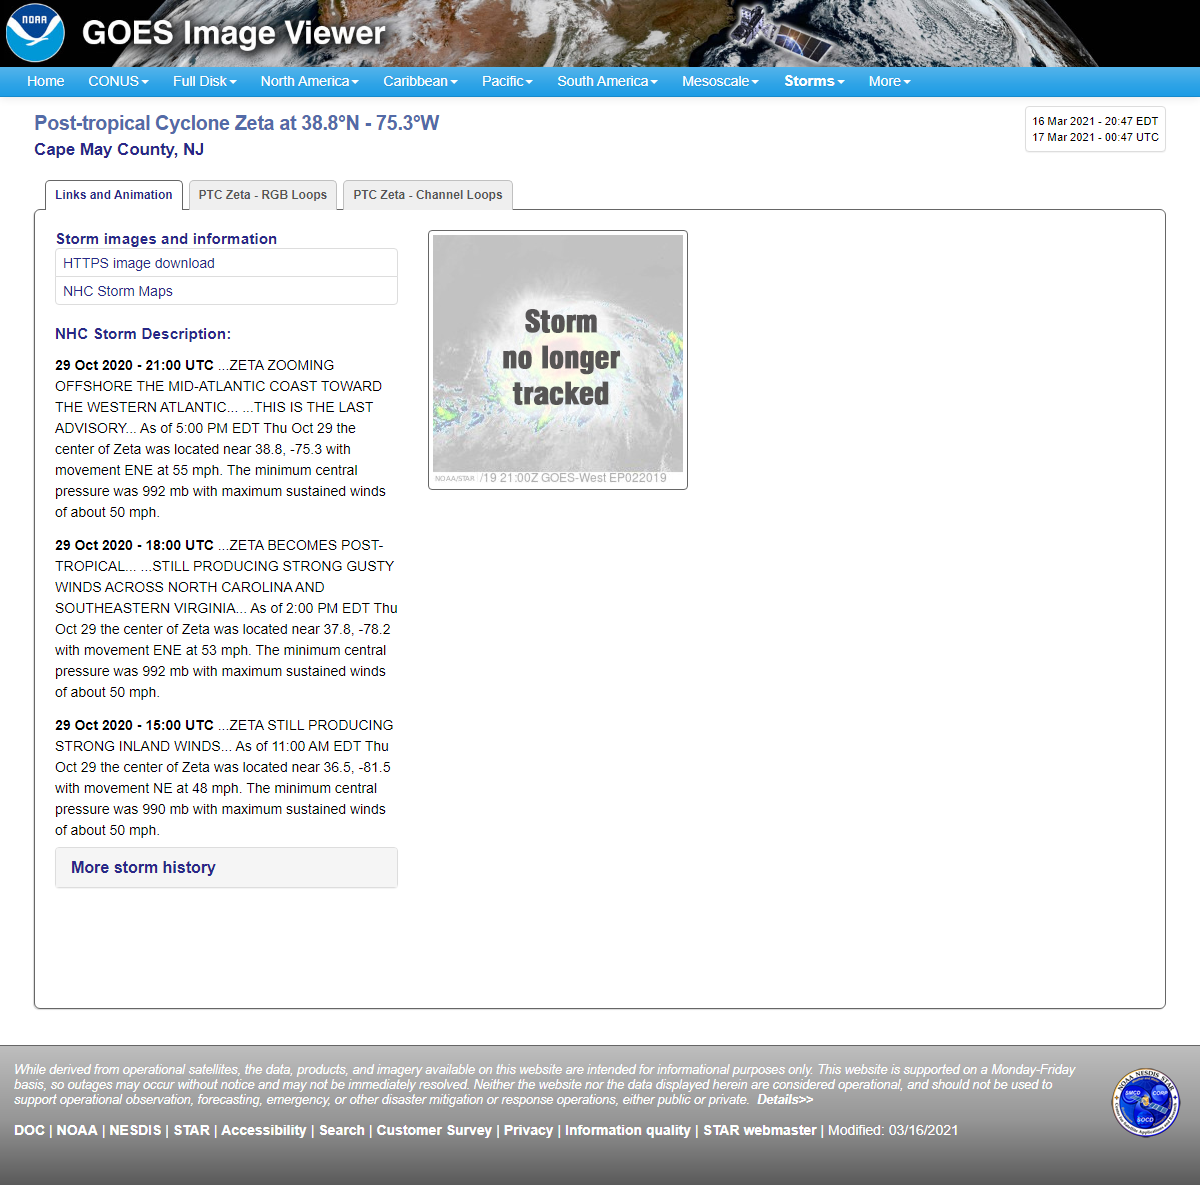 A complete backup of https://www.star.nesdis.noaa.gov/GOES/floater.php?stormid=AL282020